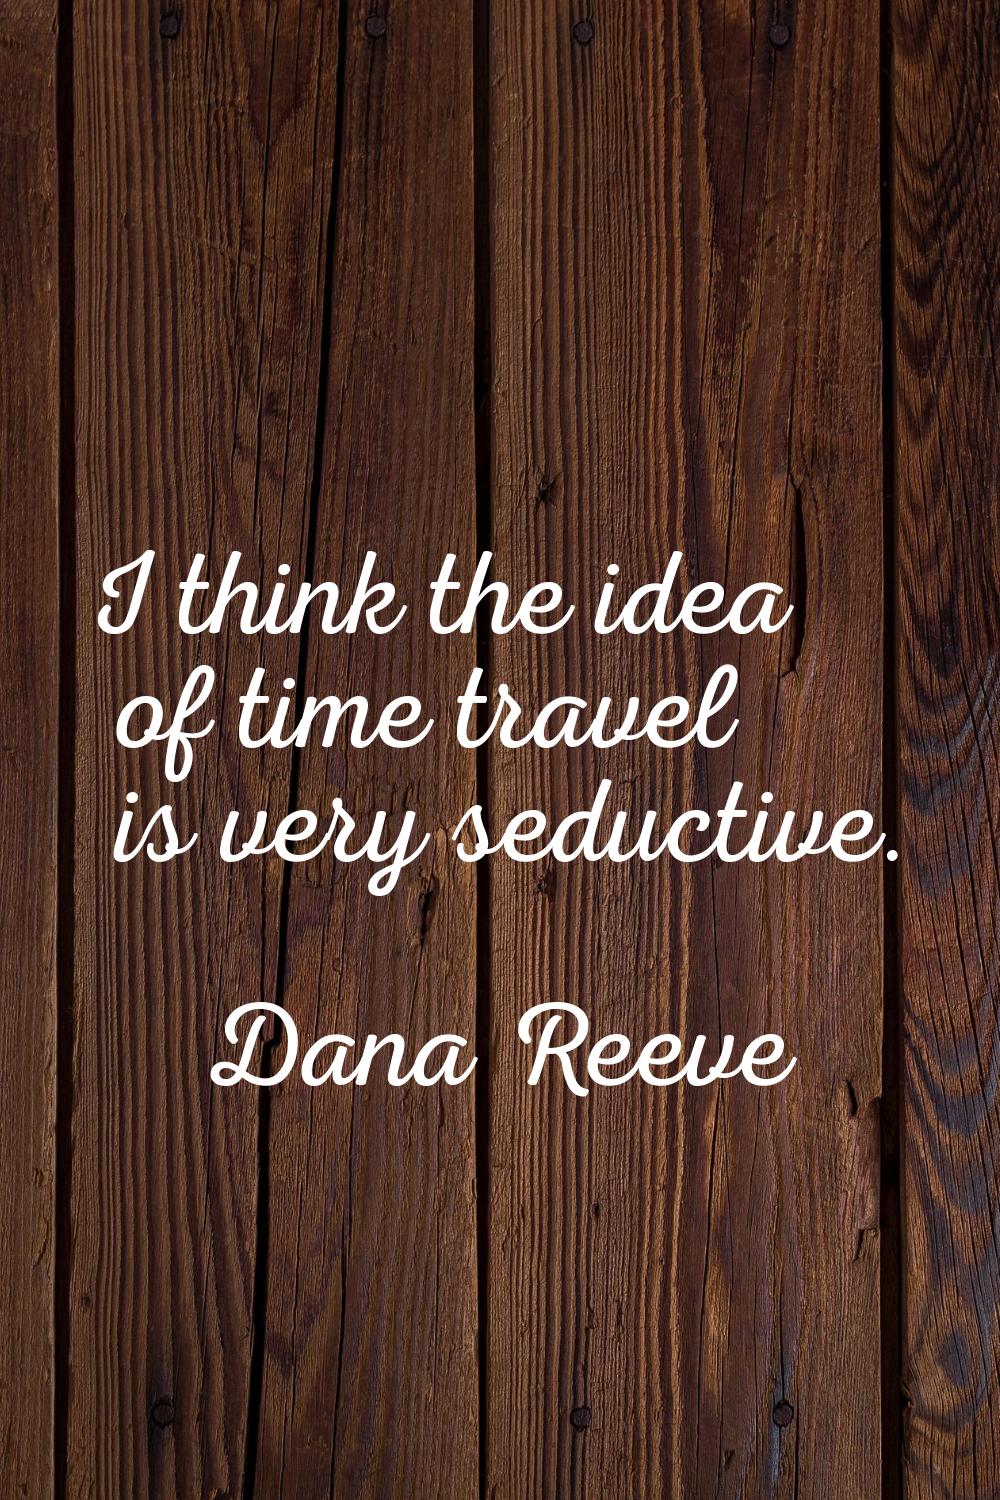 I think the idea of time travel is very seductive.